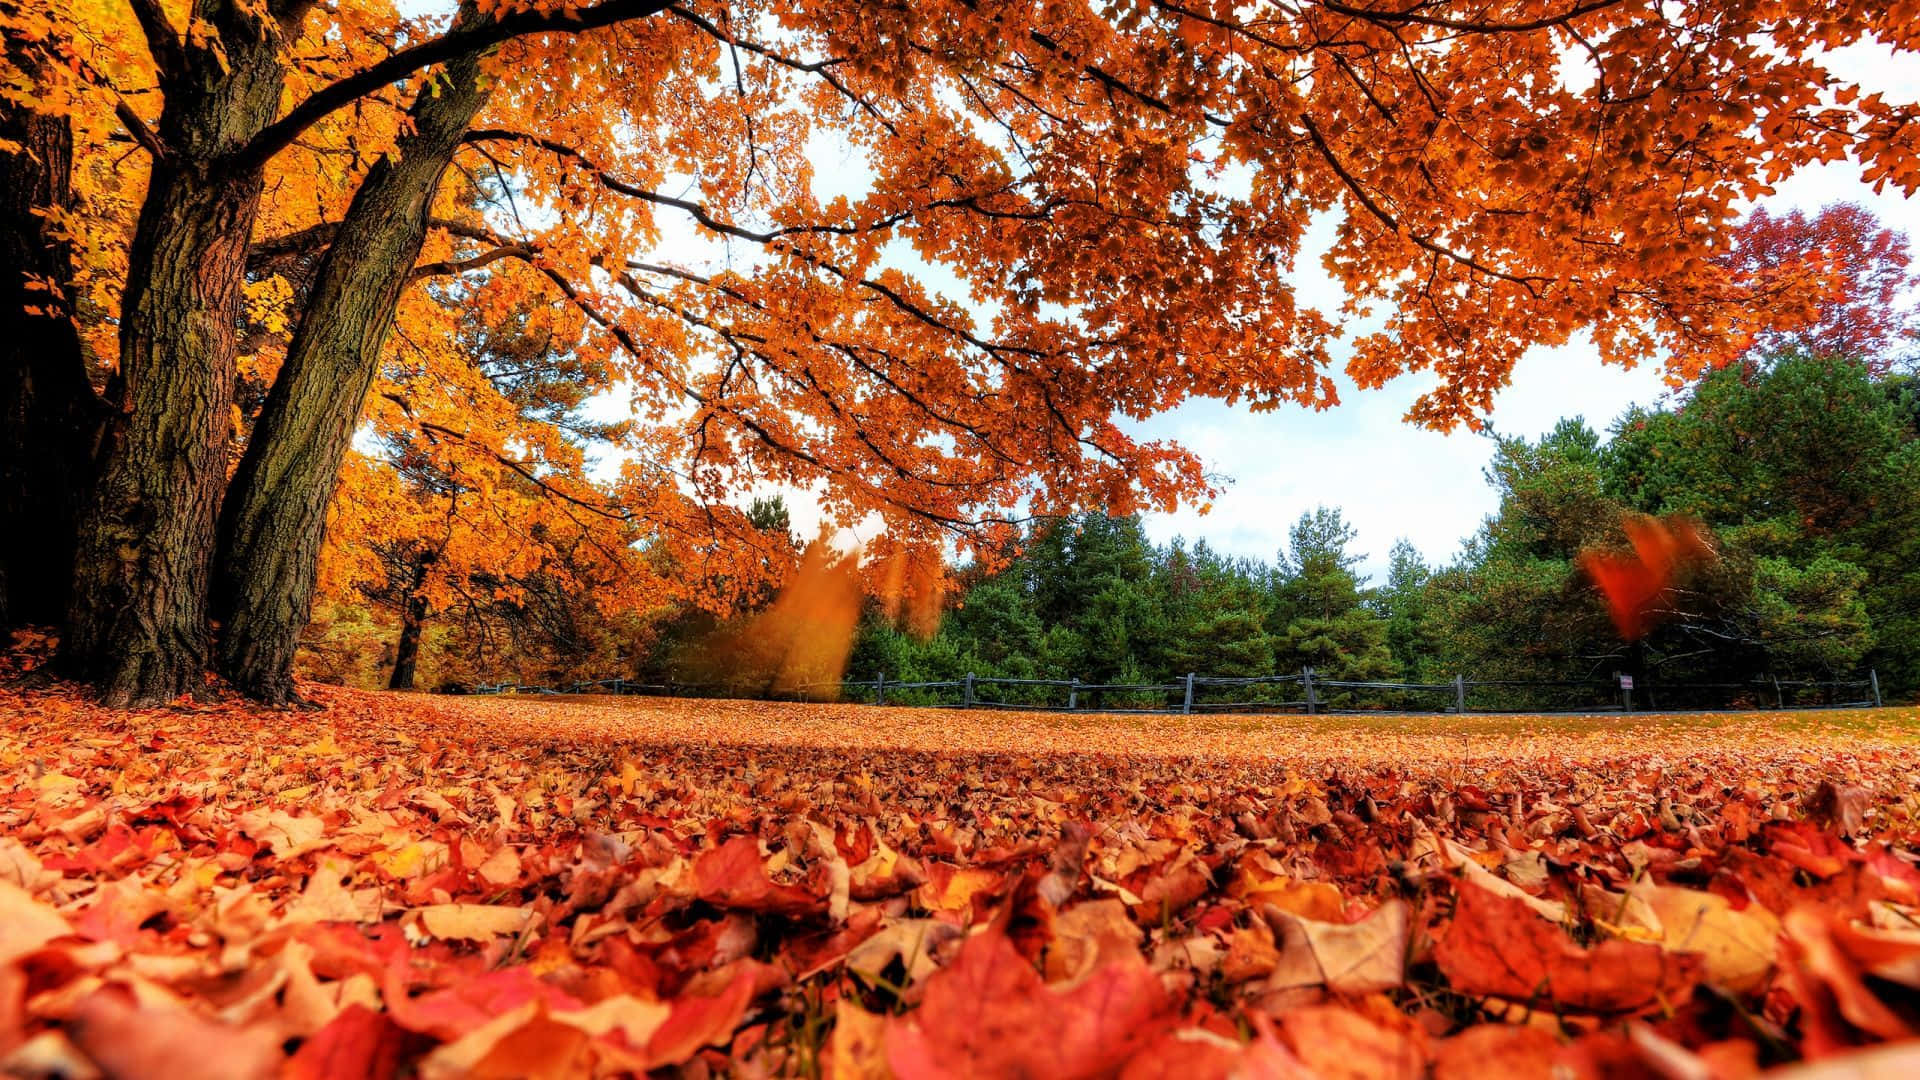 Revel in the beauty of Autumn foliage Wallpaper